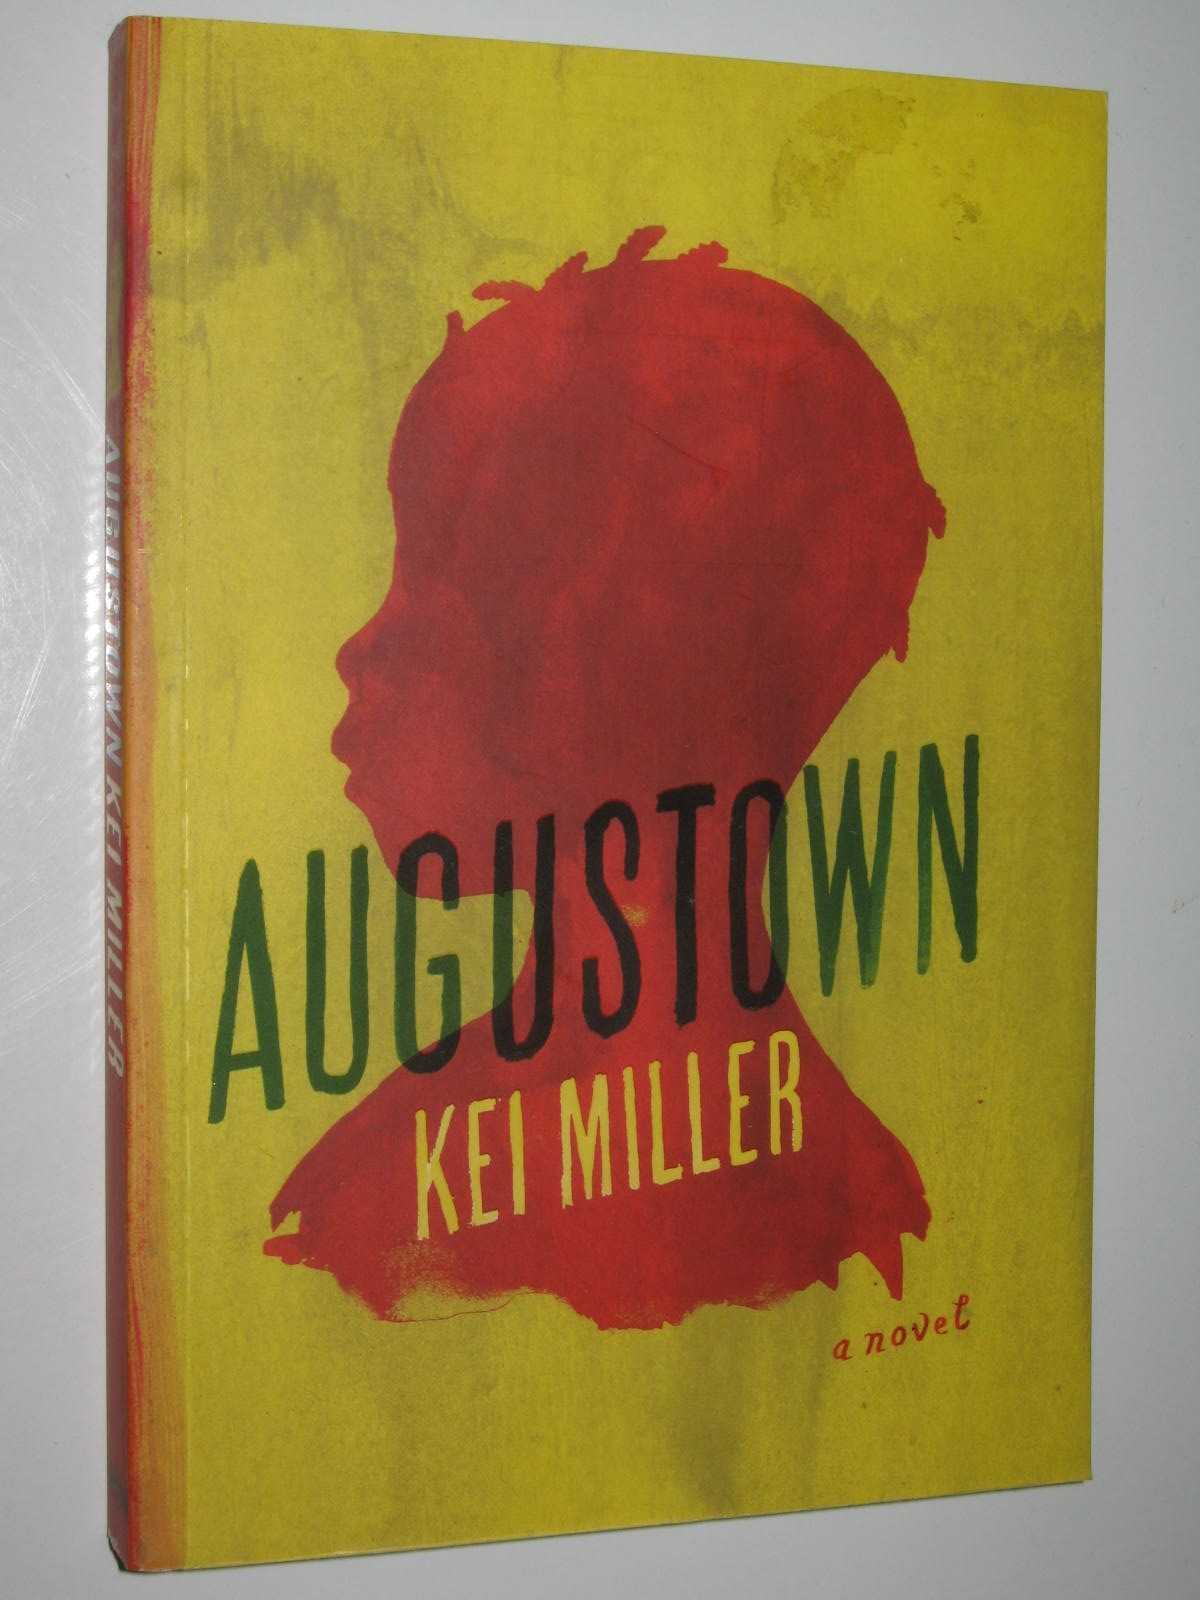 augustown book